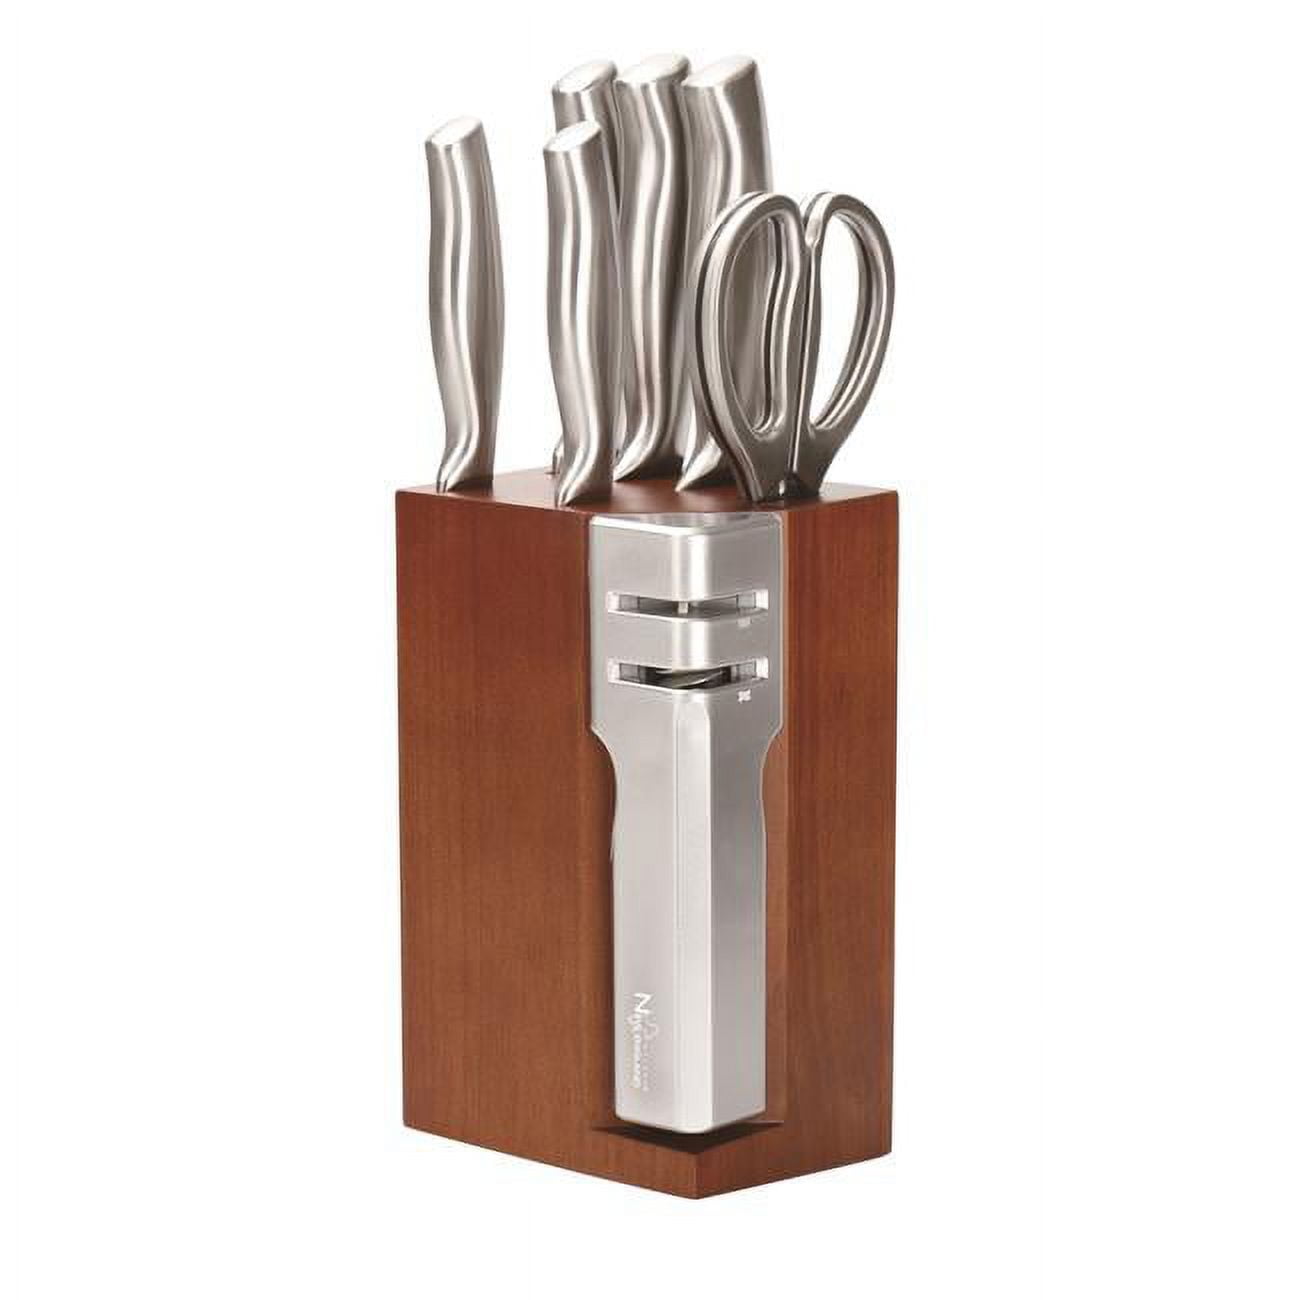 Picture of CULINARY EDGE 98832 NEW ENGLAND STAINLESS STEEL CUTLERY SET WITH DETACHABLE 2 STAGE KNIFE SHARPENER